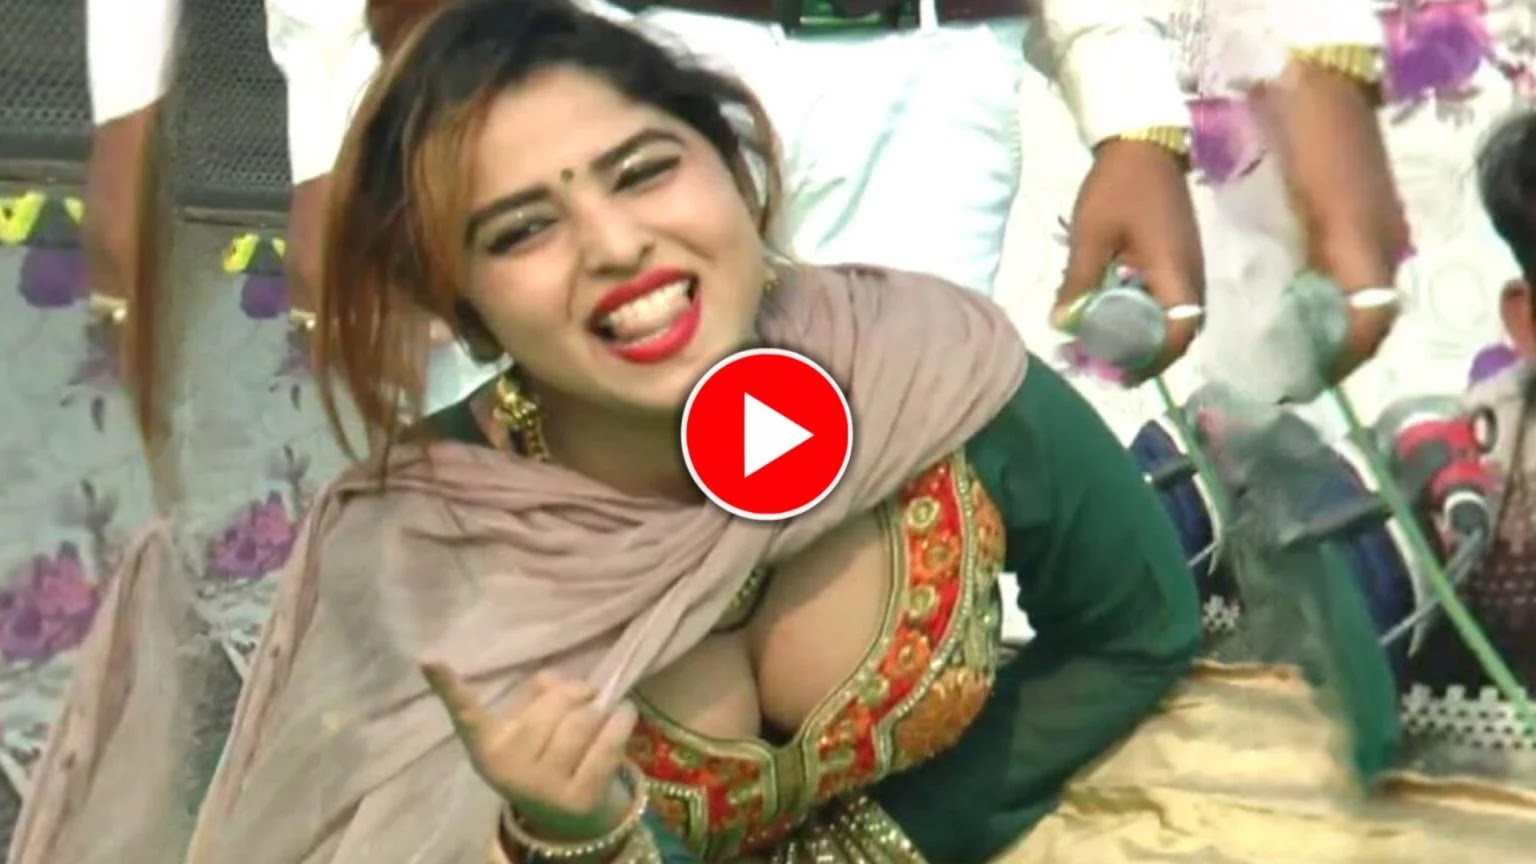 Muskan Baby's amazing dance on the stage full of 'Cholike Pichhe Kya Hai', here is the video